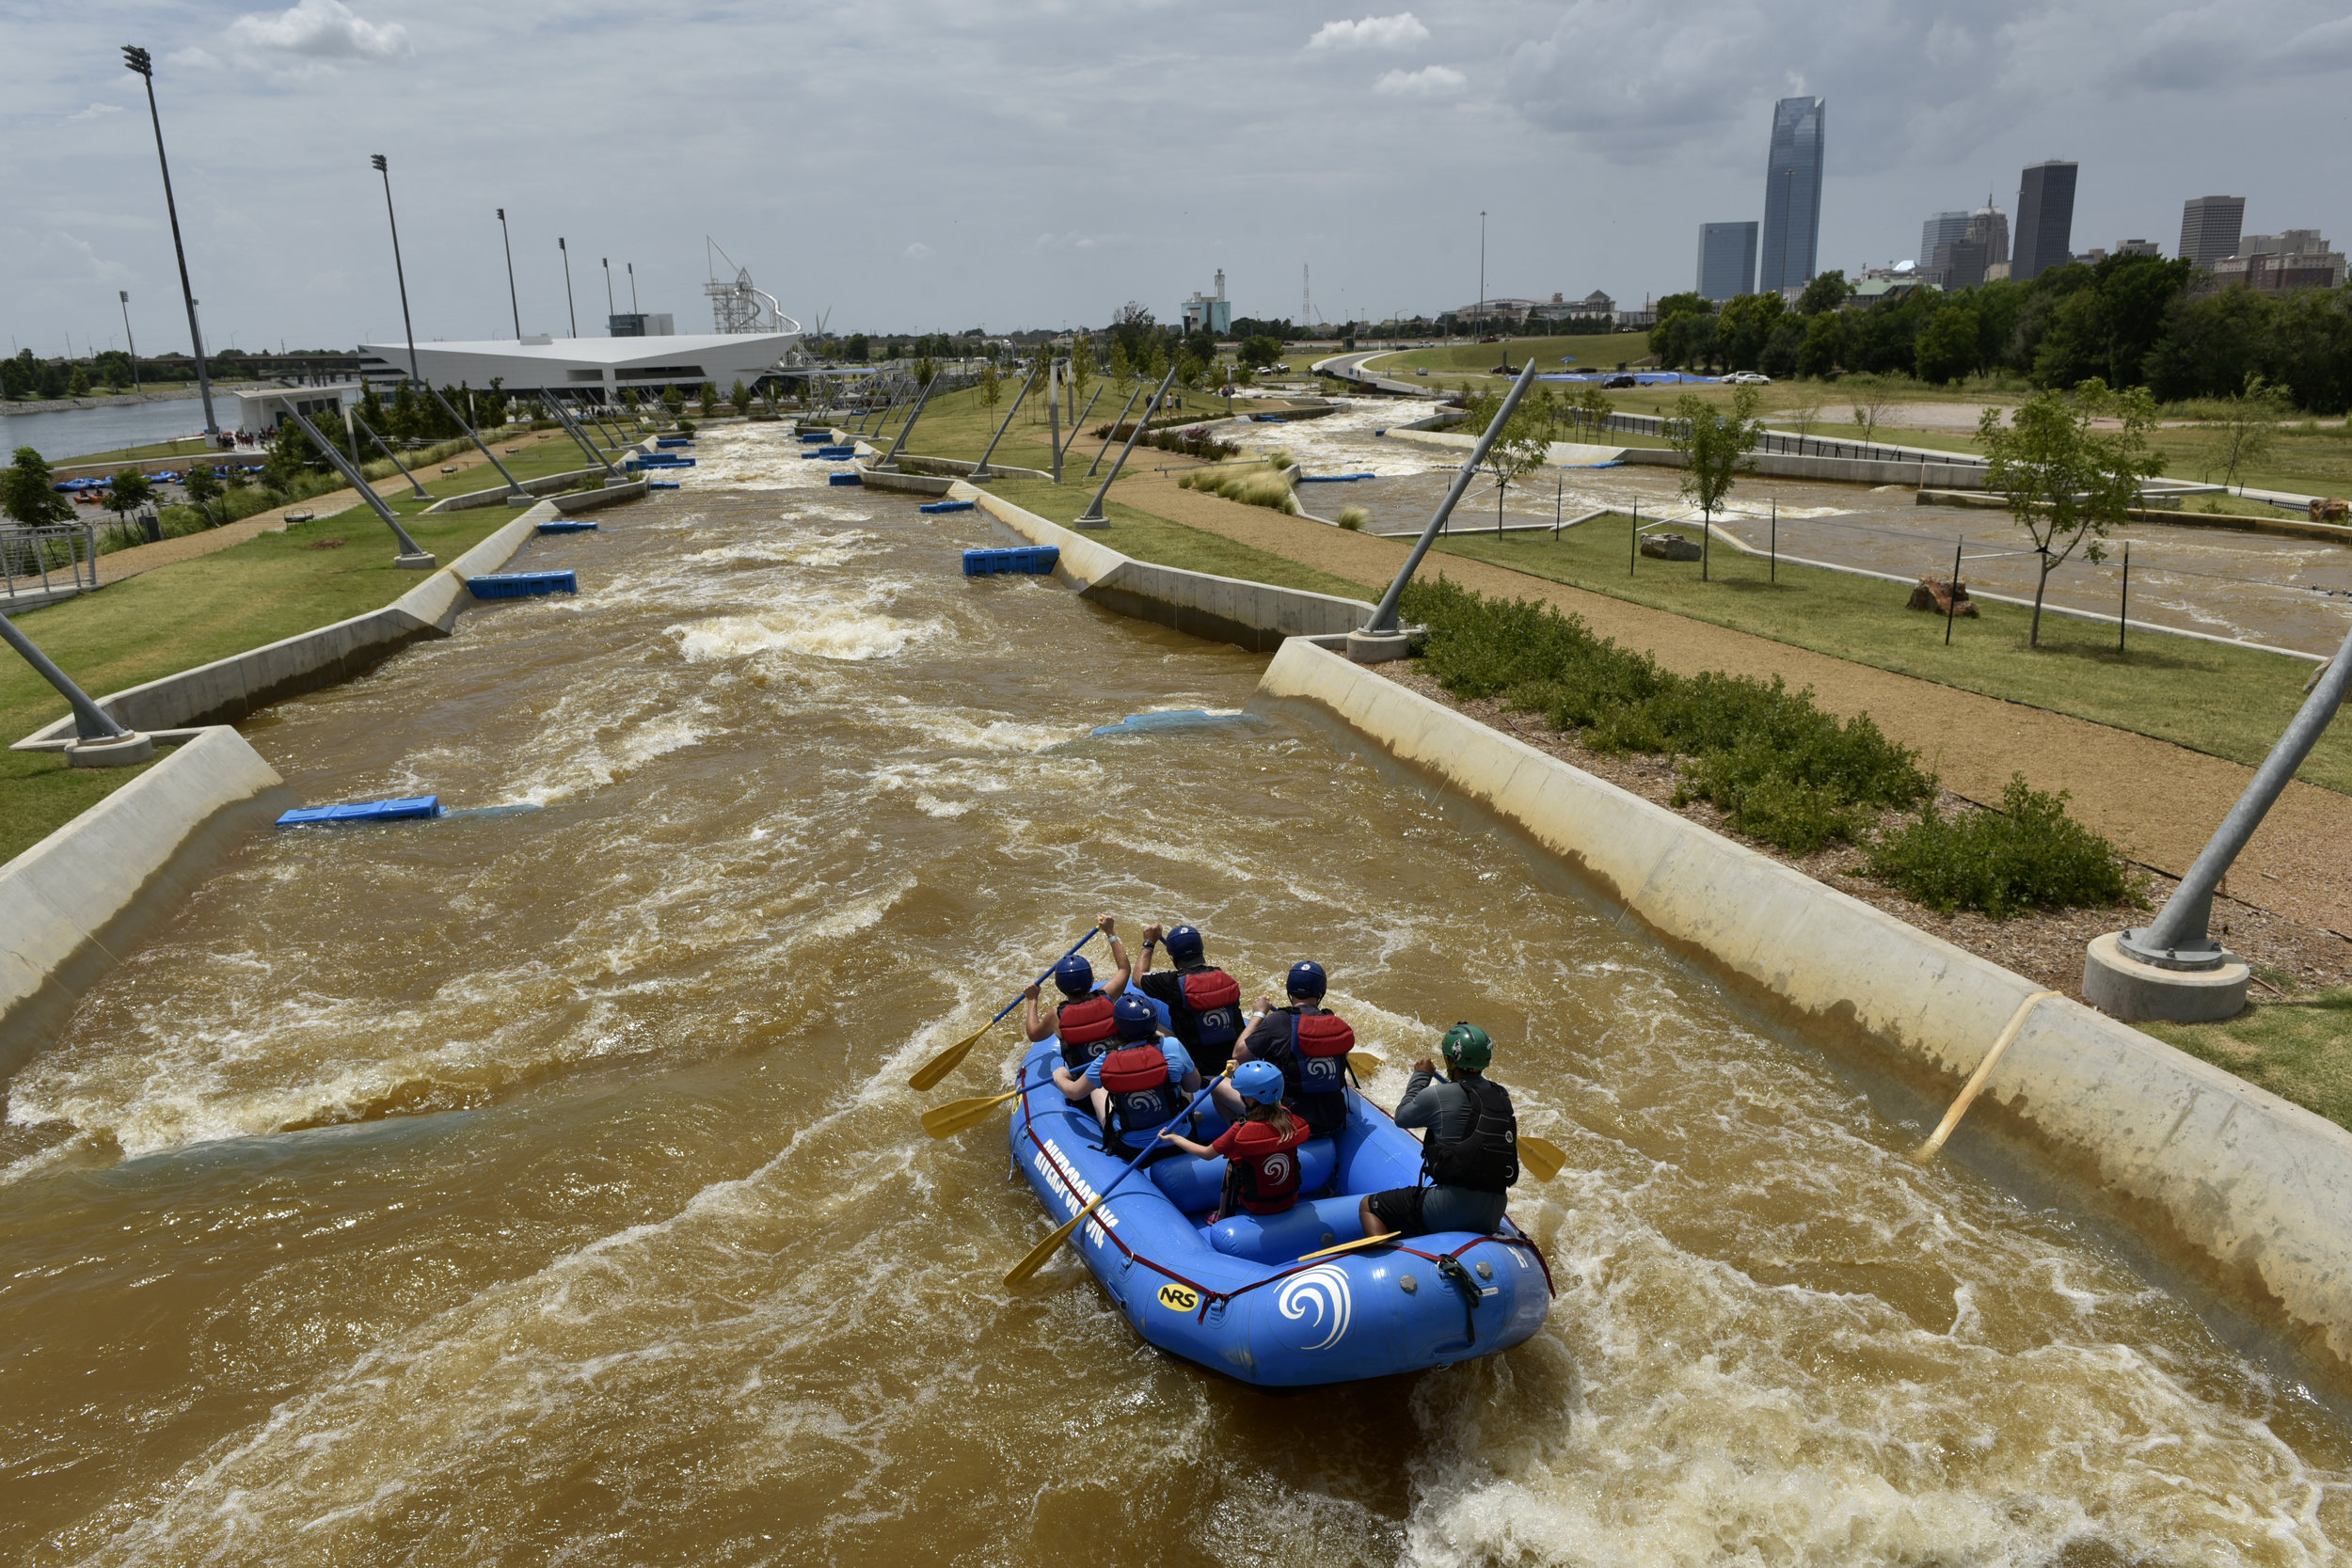  A group traverses the rapids at a $45.2 million Whitewater Rafting &amp; Kayaking Center that was paid for by a 1-cent sales tax increase in Oklahoma City on July 14, 2018. (Photo by Nick Oxford for The Washington Post) 